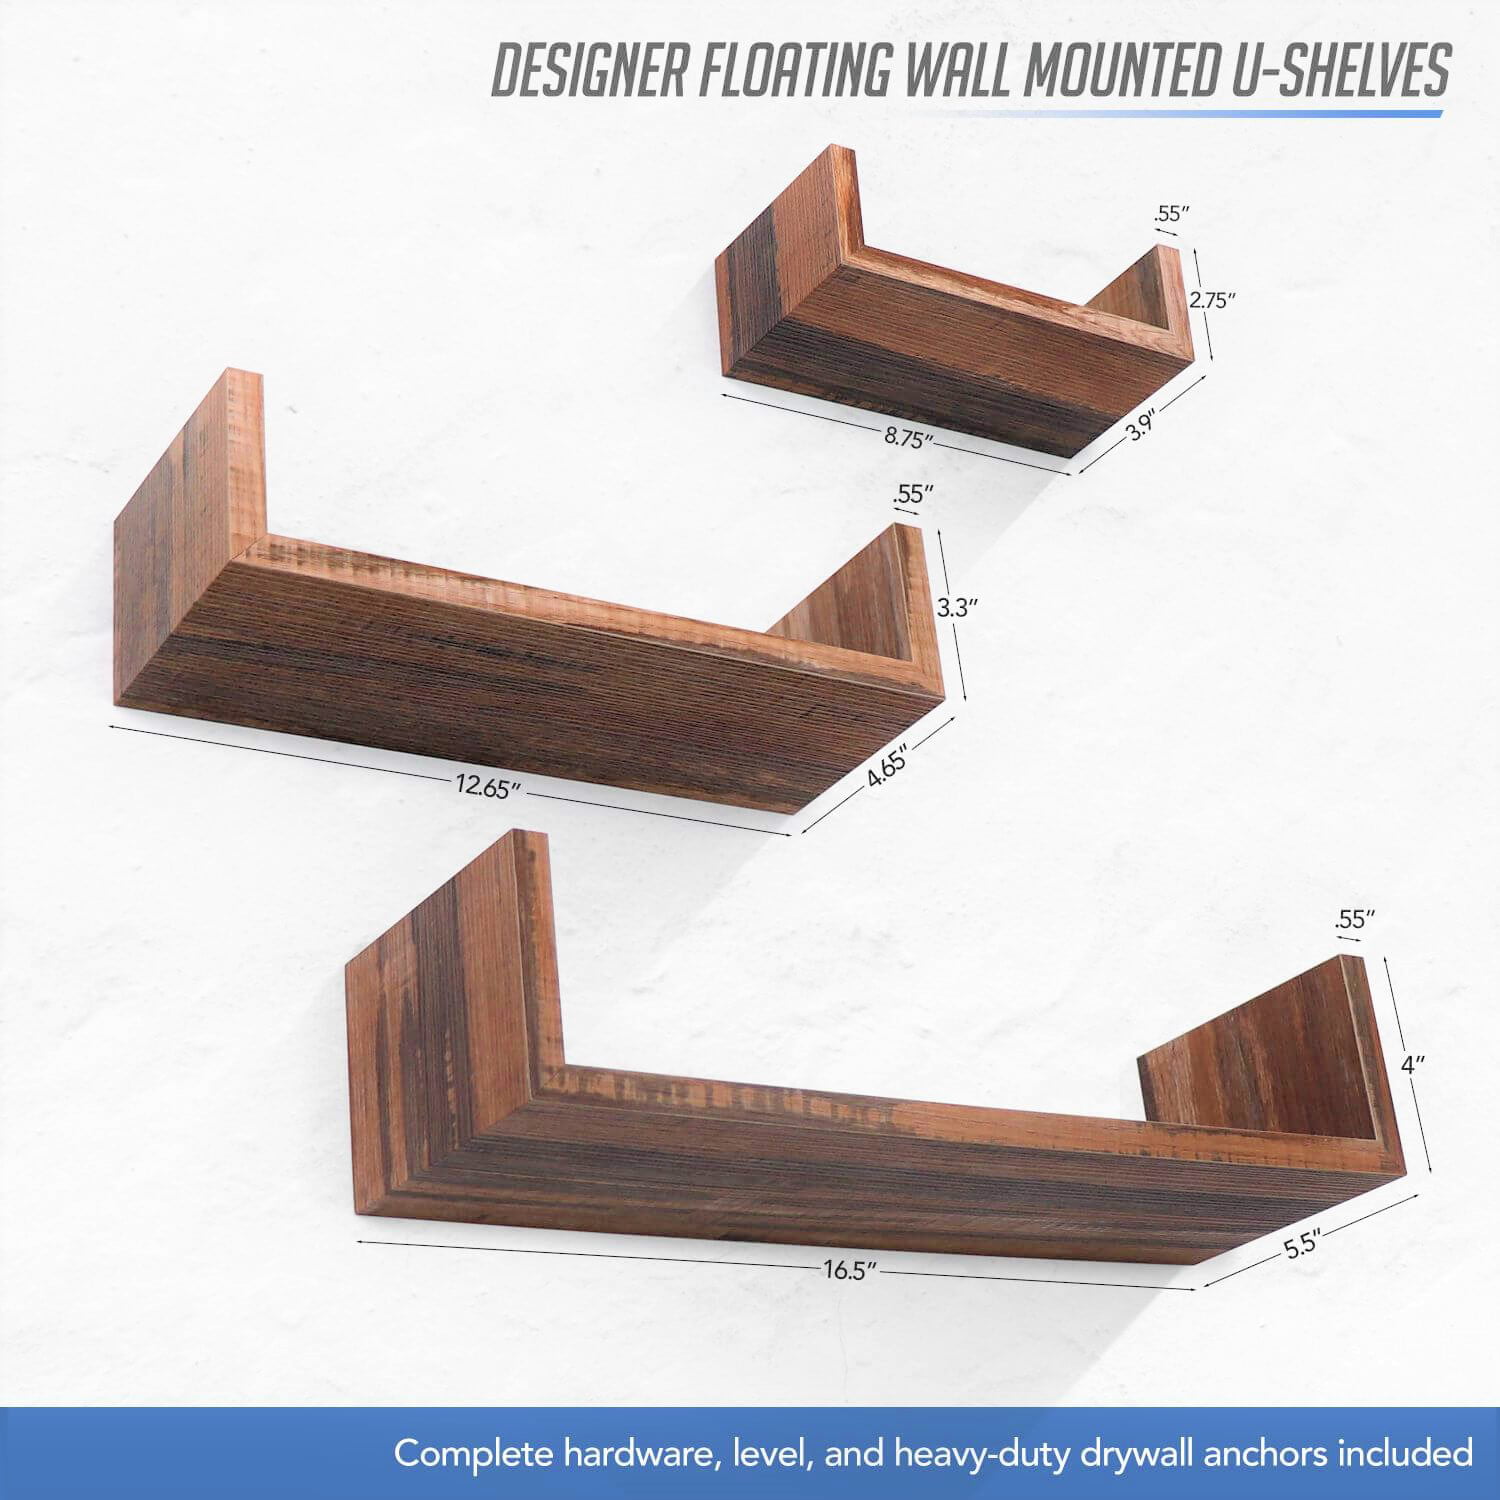 Details about   Under.Stated U Shaped Floating Wall ShelvesRustic MDF boards ShelvingBrown 